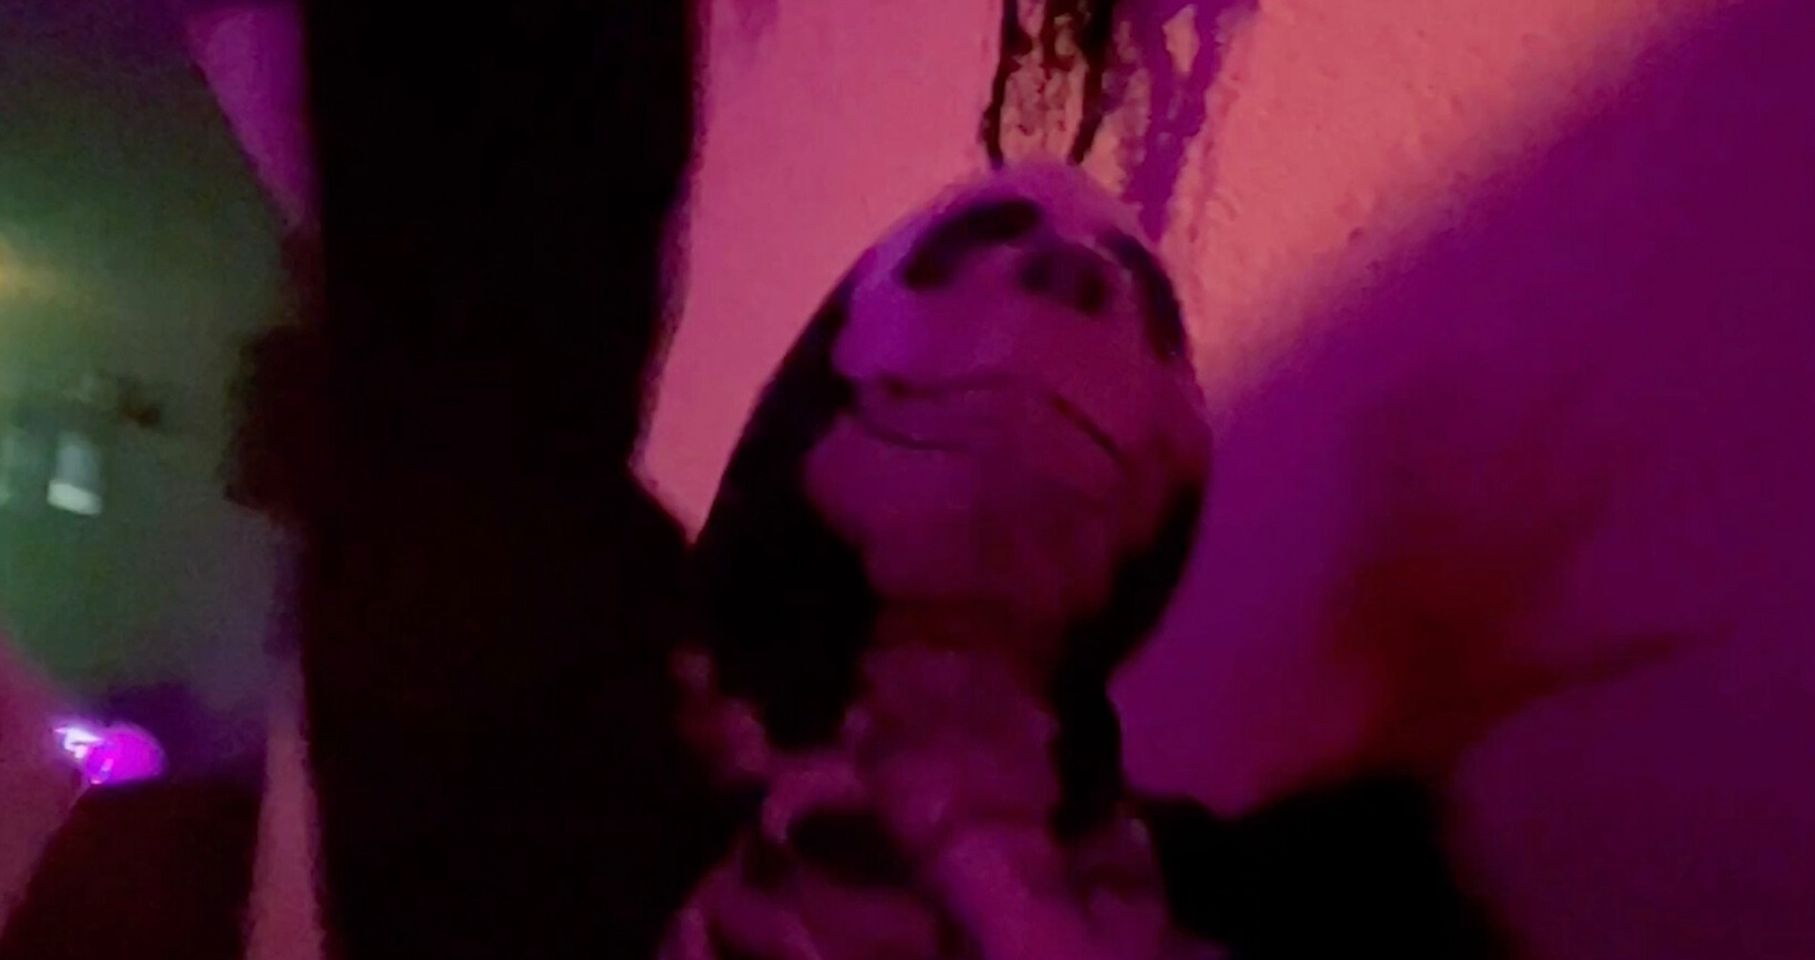 A cartoonish puppet dangles from a string in a subtly lit room, bathed in soft shades of pink and purple.